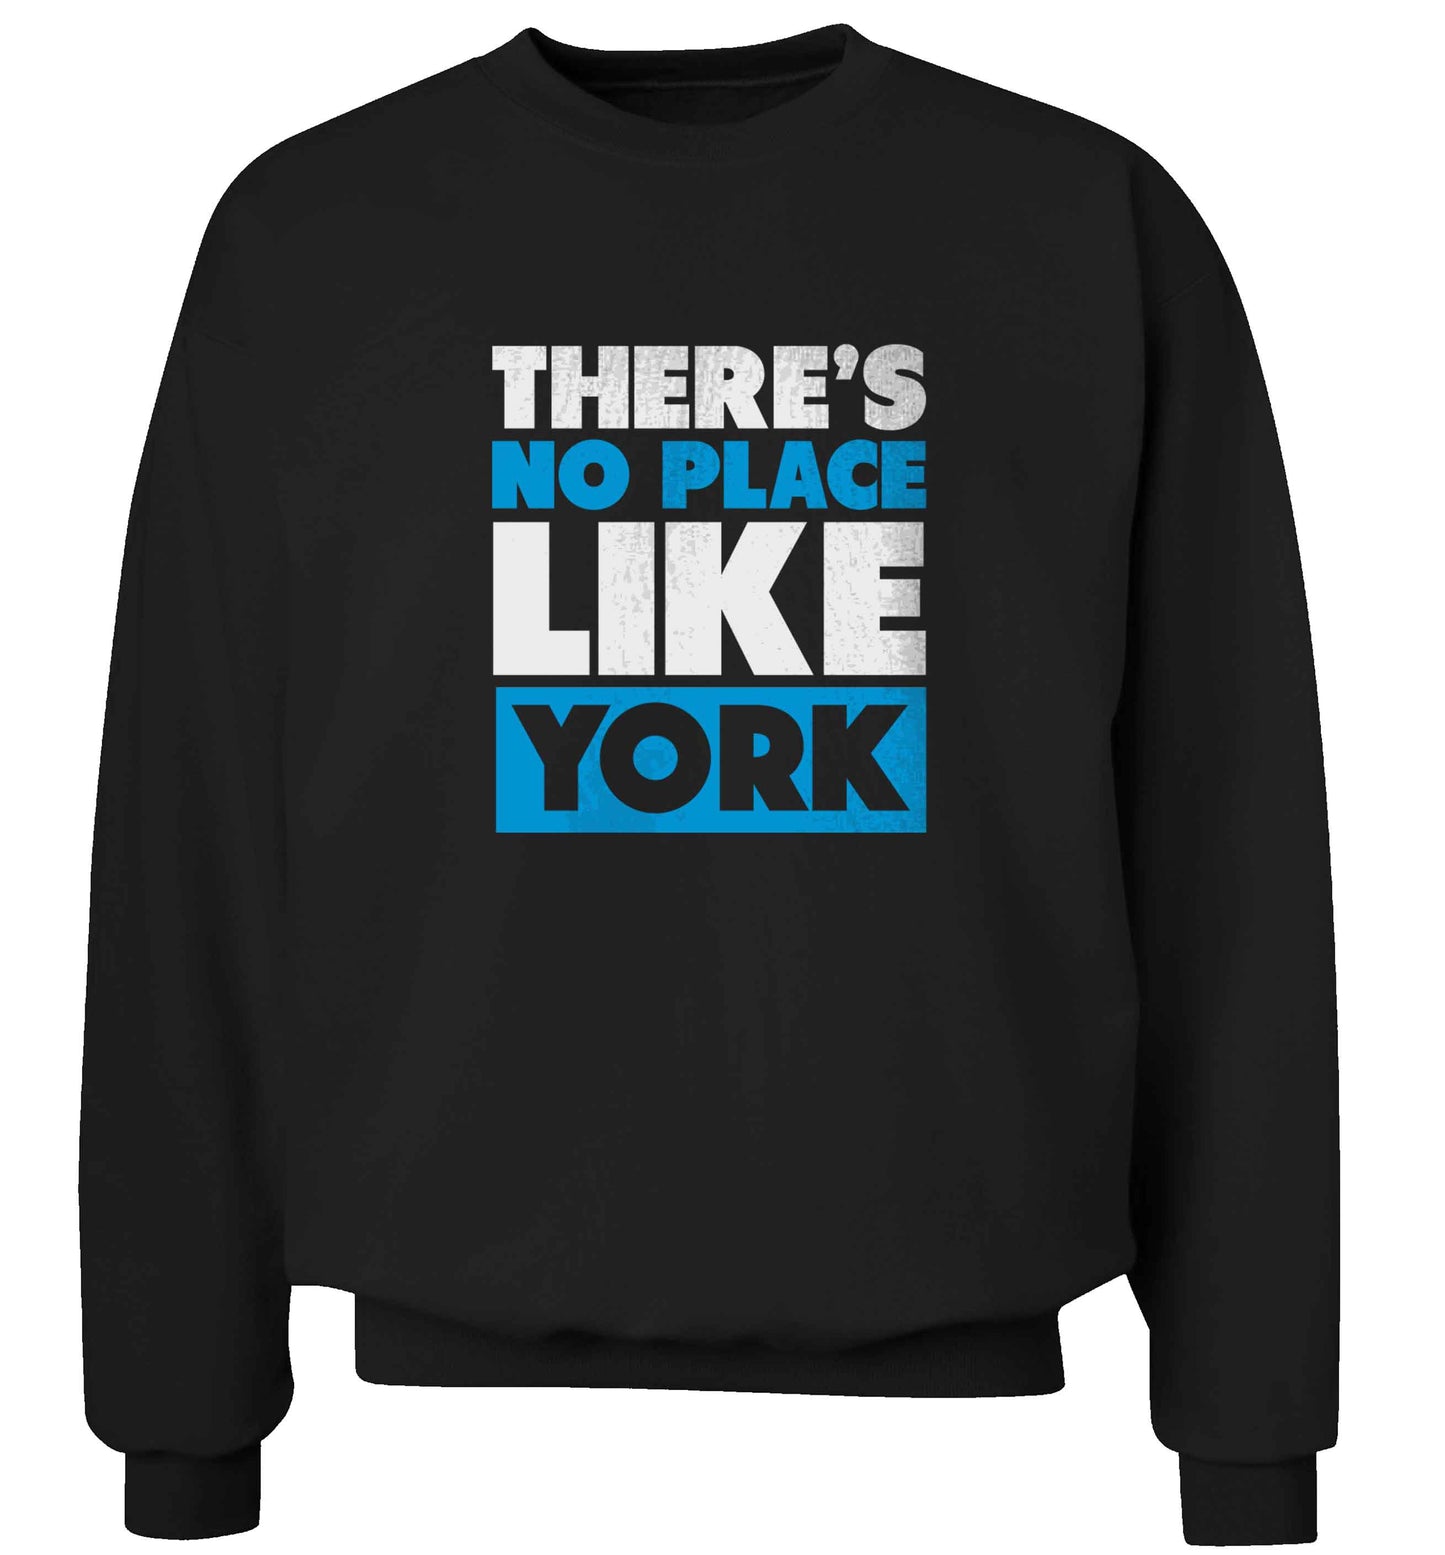 There's no place like york adult's unisex black sweater 2XL